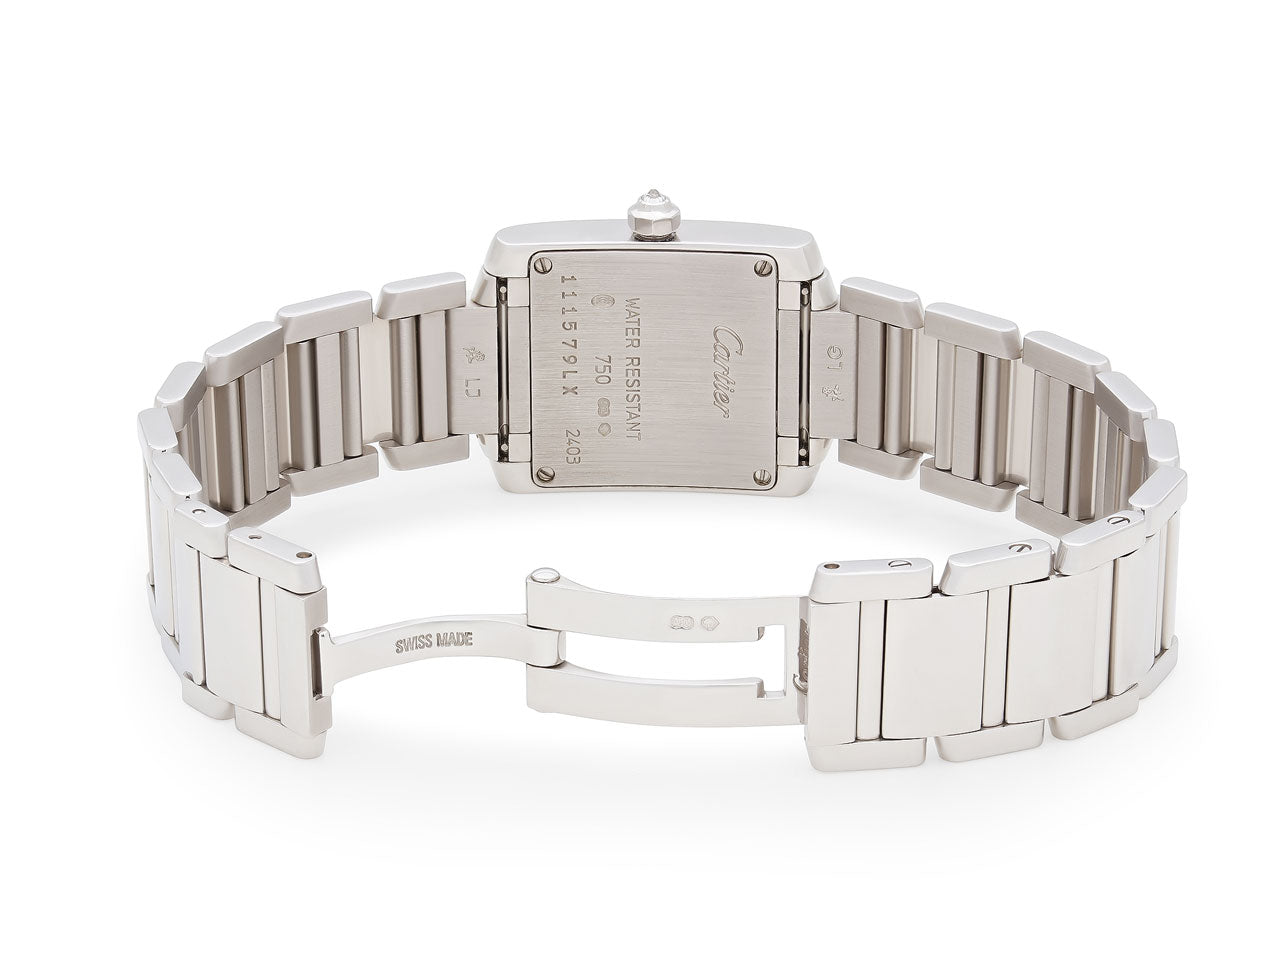 Cartier 'Tank Française' Diamond Watch in 18K White Gold, Small Model